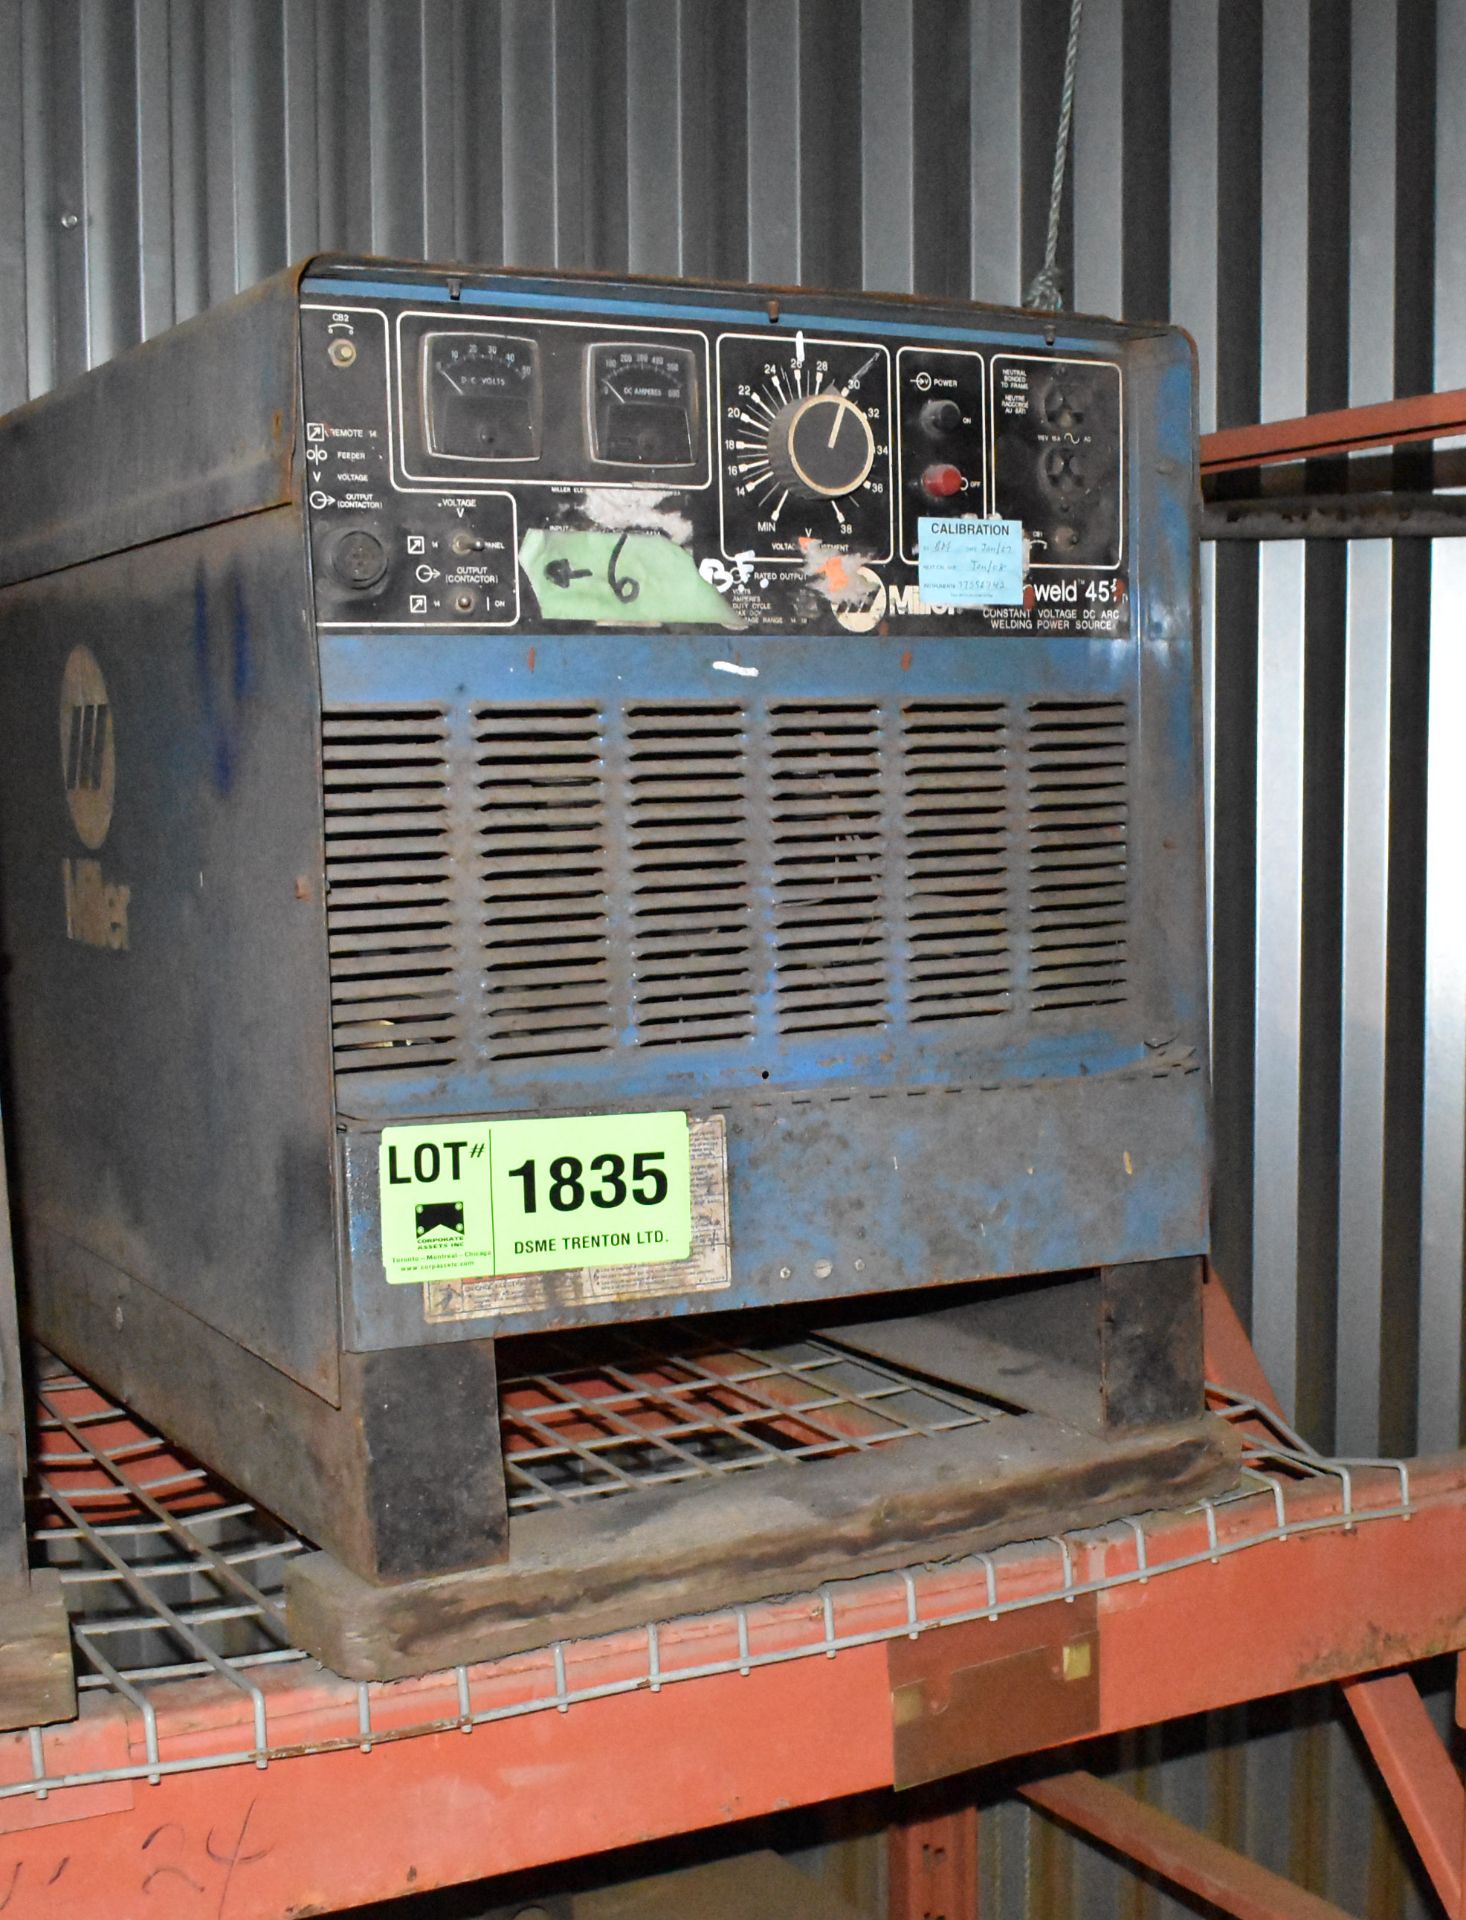 MILLER DELTAWELD 451 WELDING POWER SOURCE [RIGGING FEE FOR LOT# 1835 - $40 USD +PLUS TAXES]